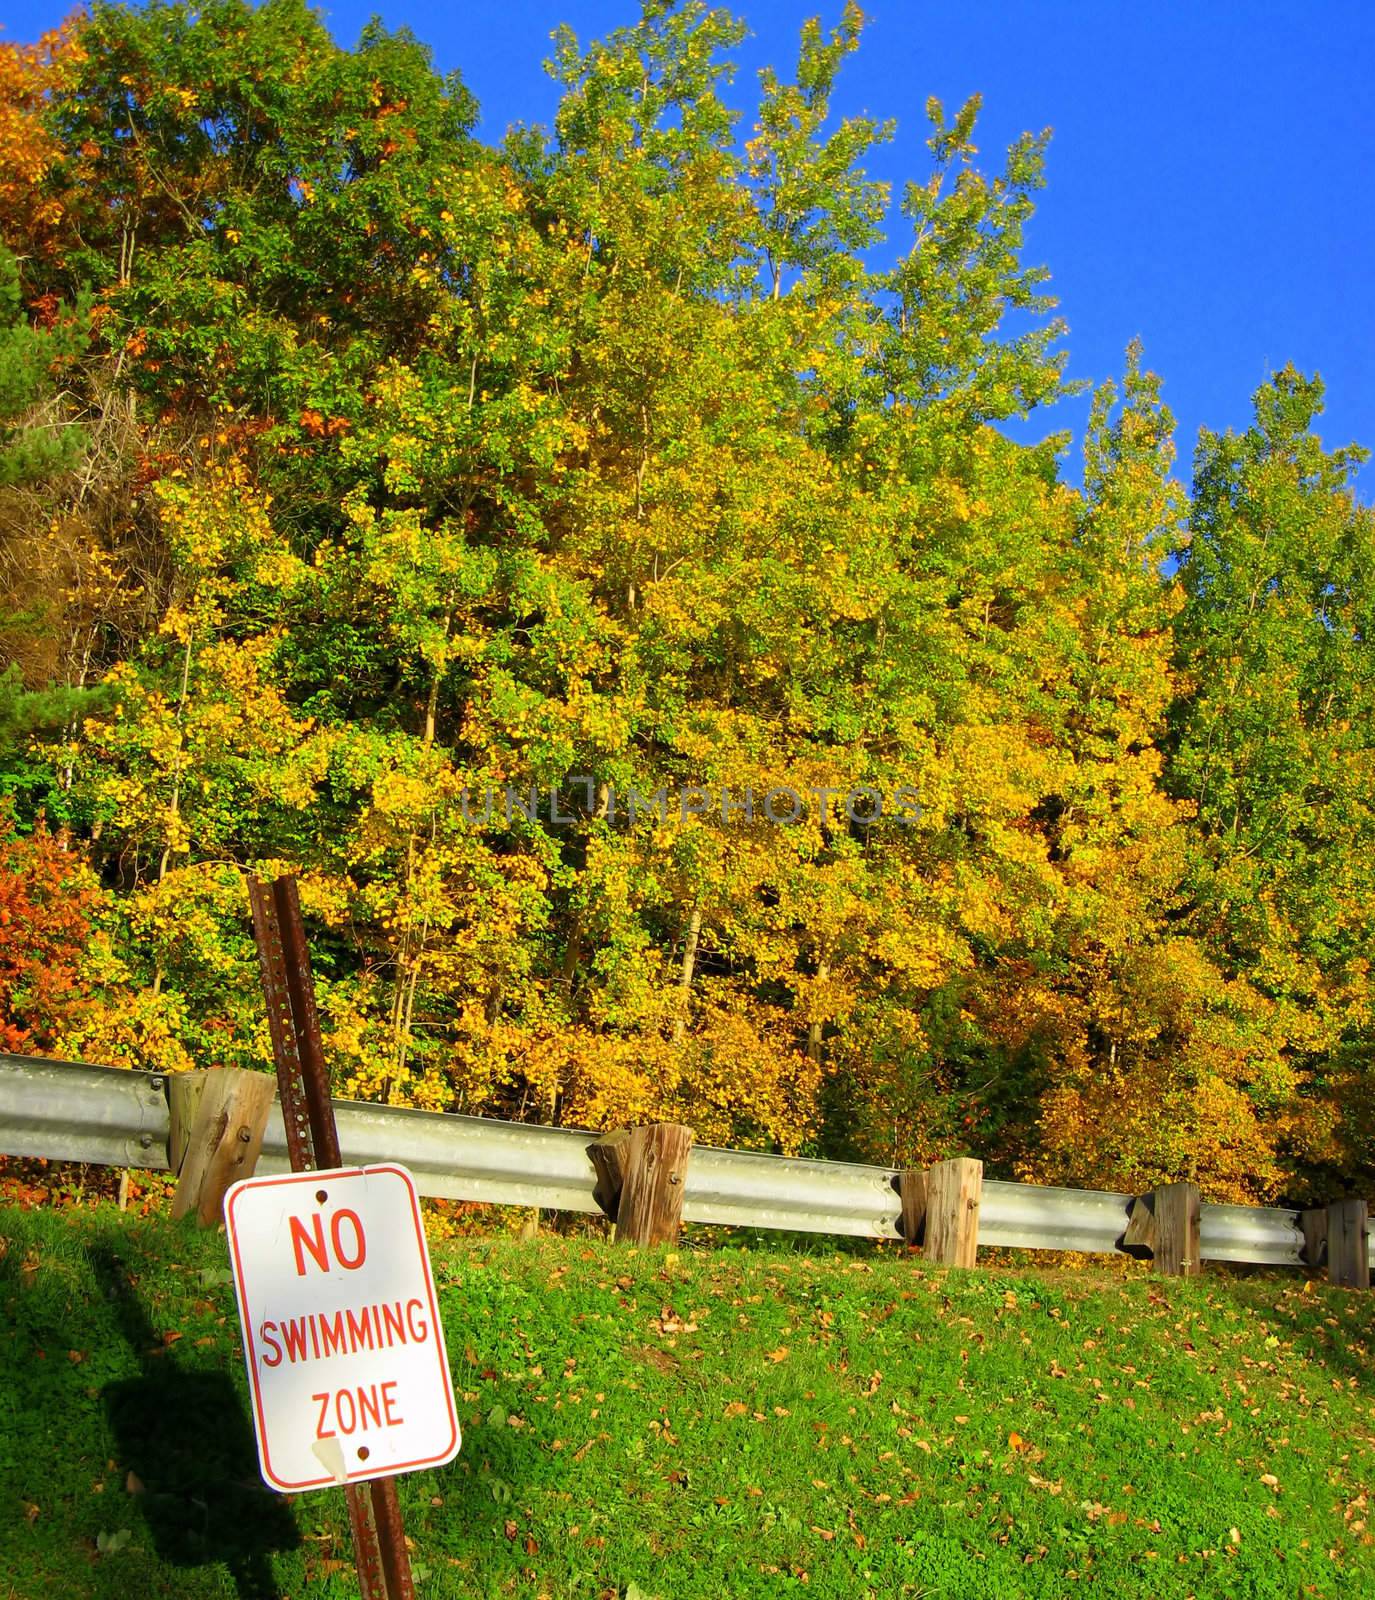 A comical "no swimming" sign next to a forest of trees